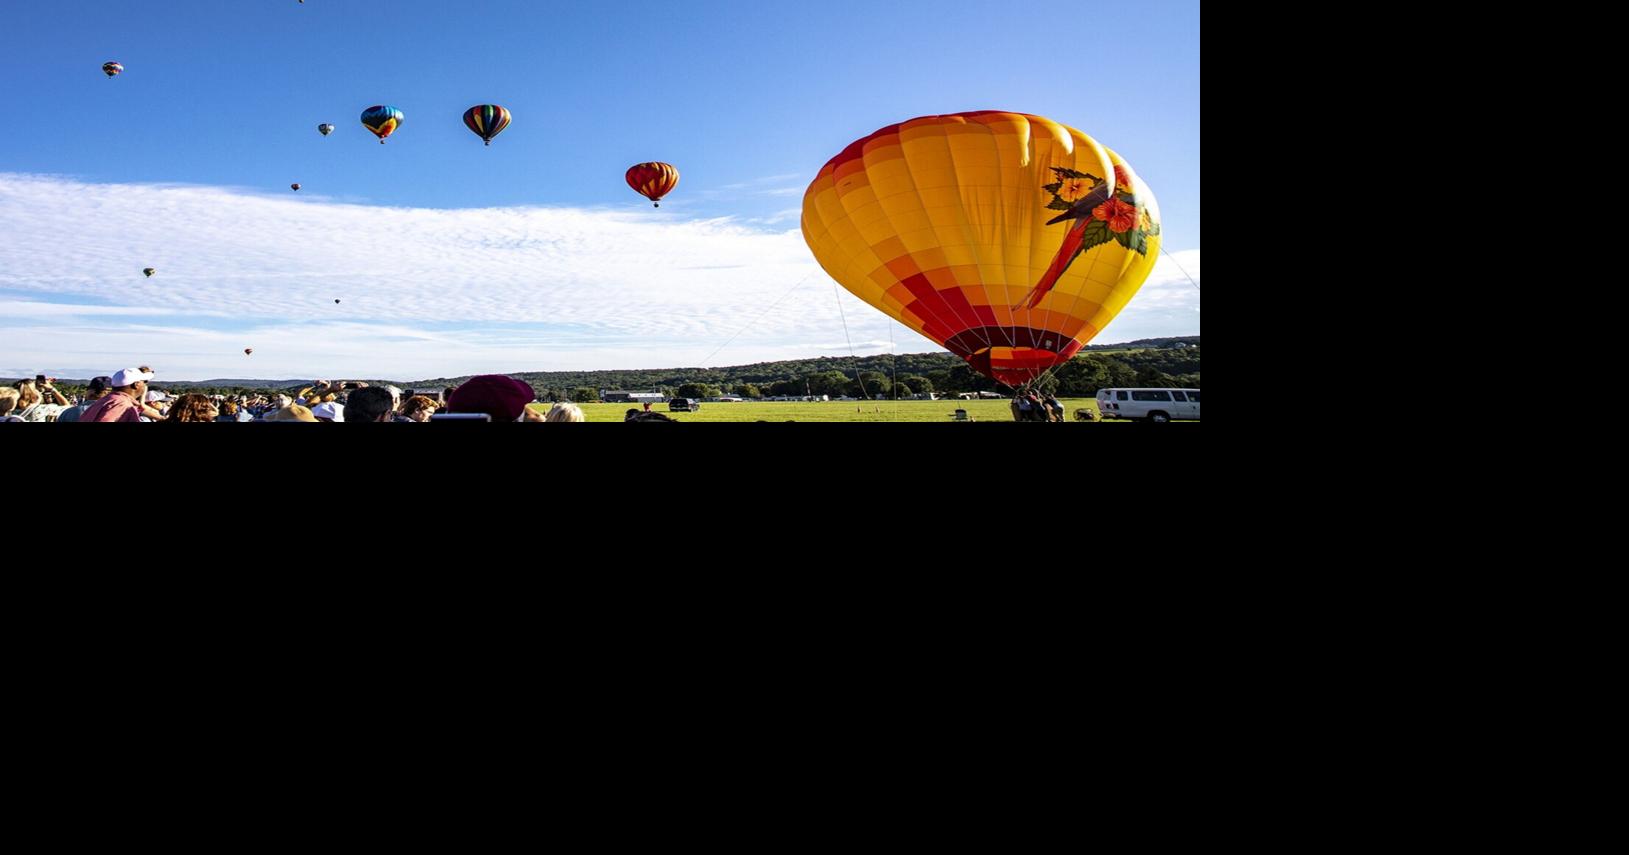 A hot air balloon festival will take off over Dansville Local News